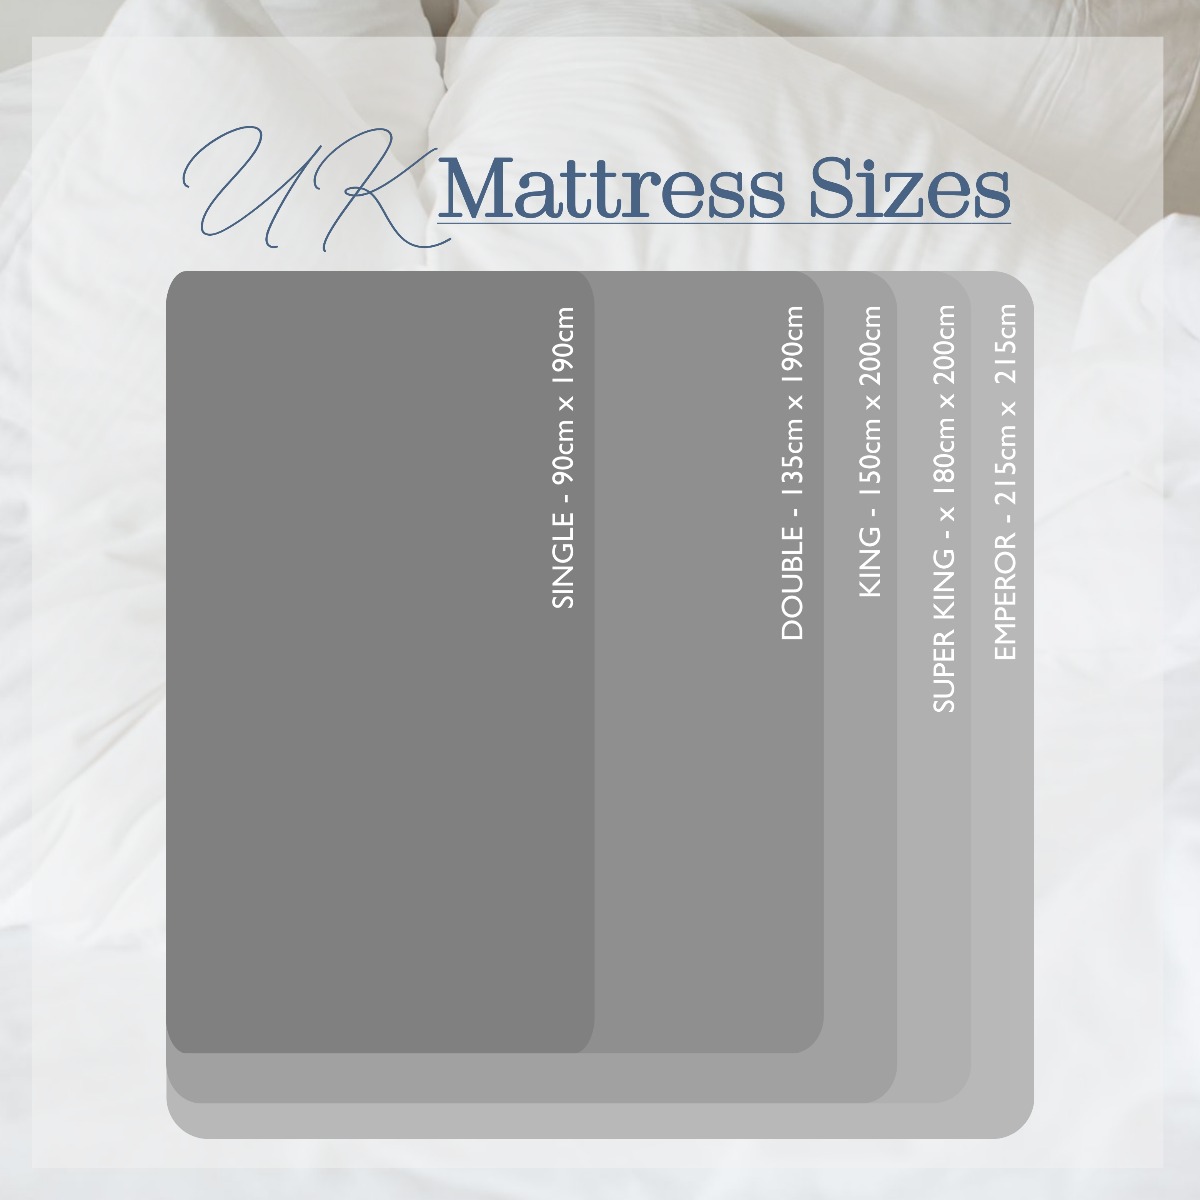 Your Guide To Uk Mattress Sizes The, What Is Bigger Than A King Size Bed Uk